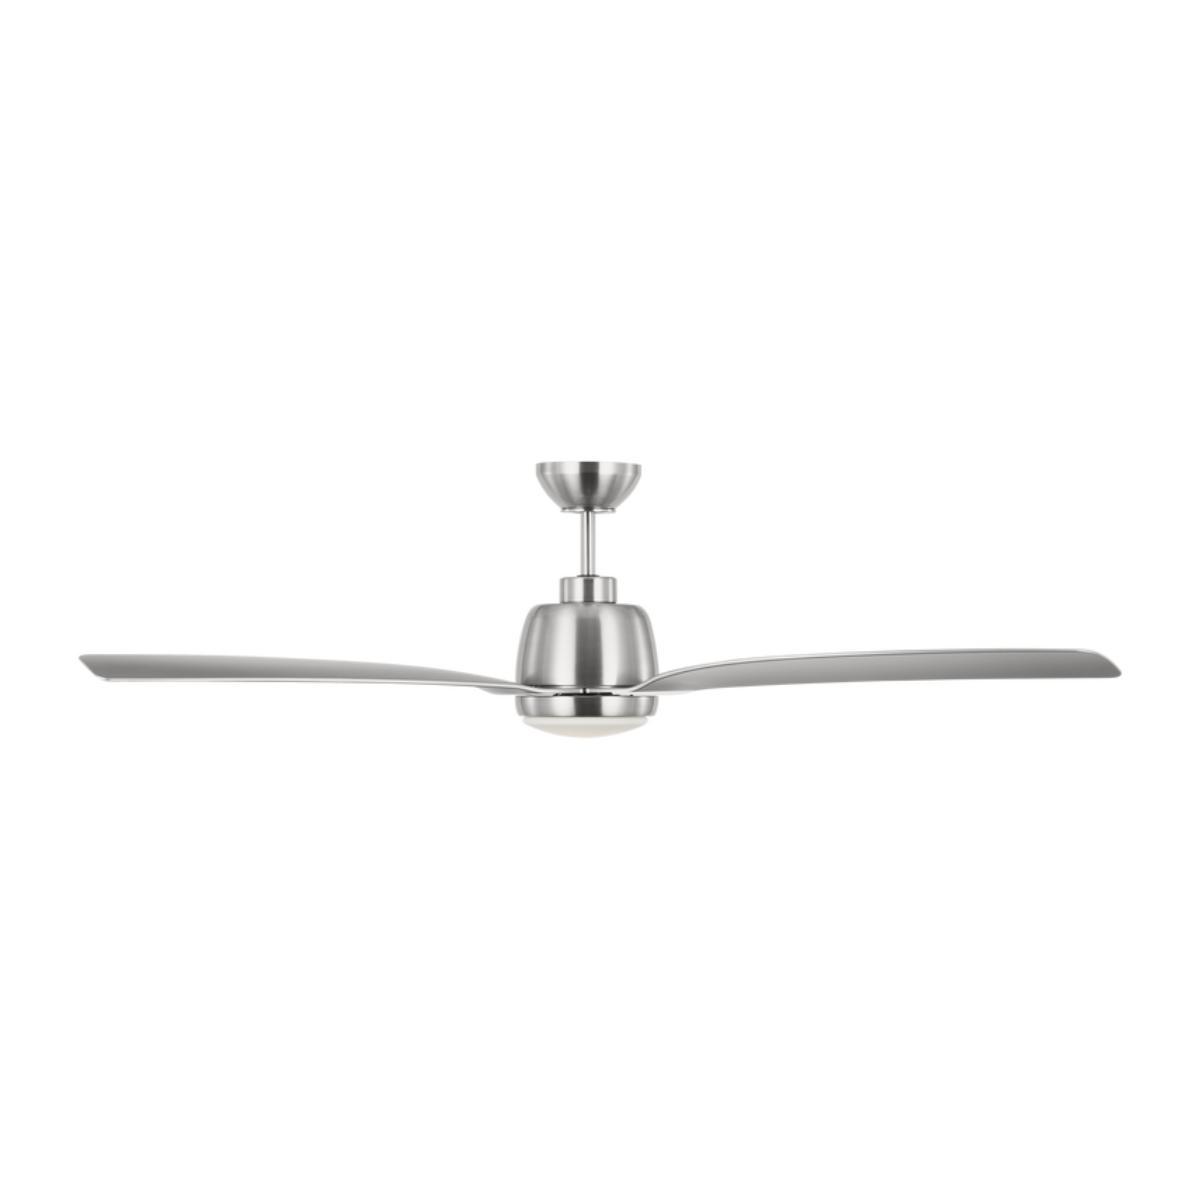 Avila 60 Inch LED Ceiling Fan with Light Kit and Remote, Brushed Steel with Silver Blades - Bees Lighting